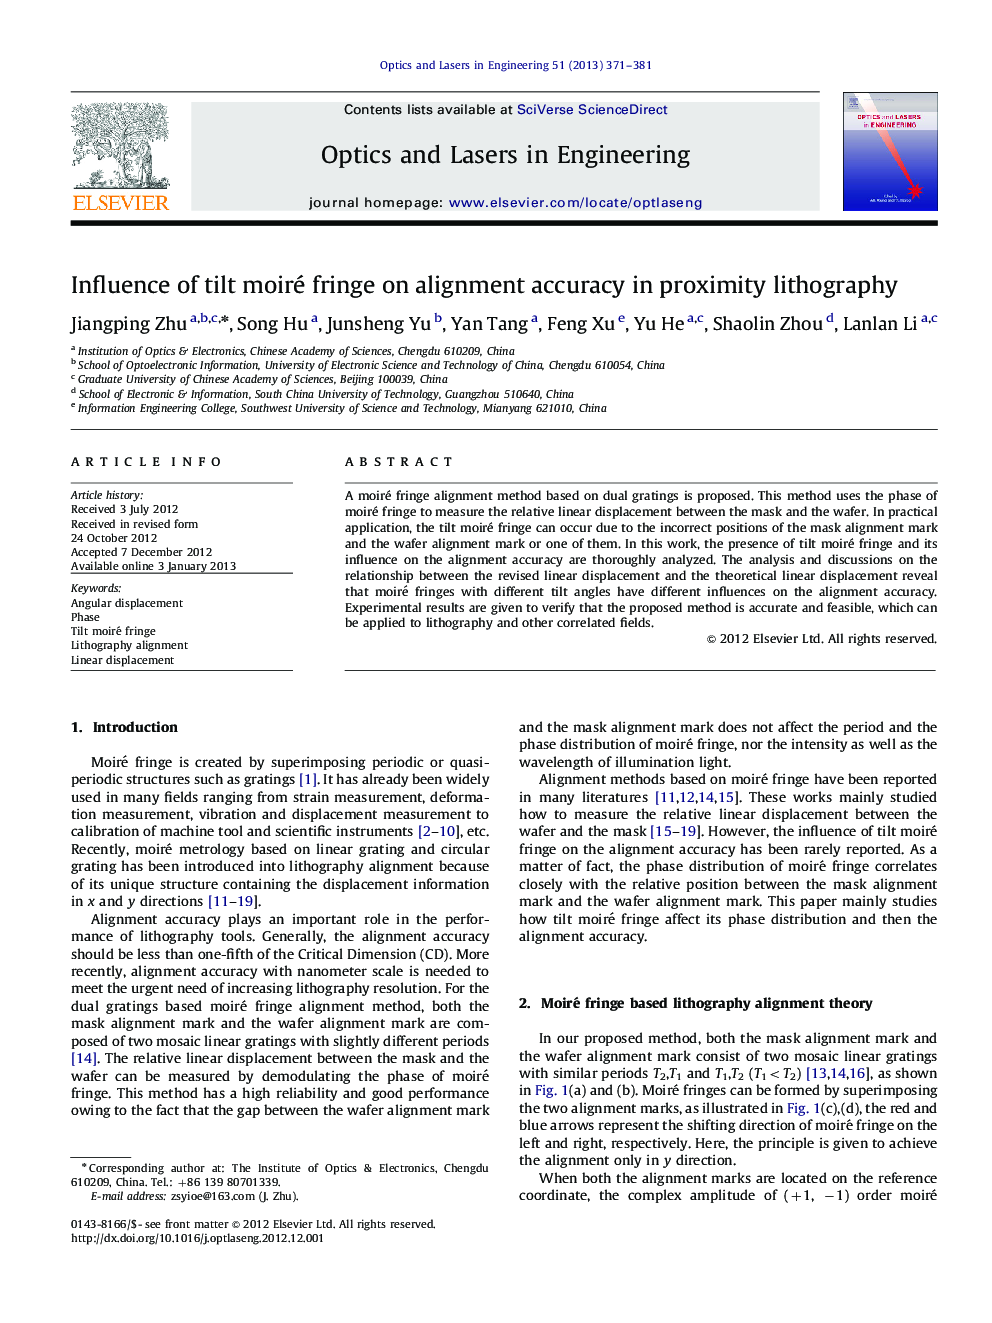 Influence of tilt moiré fringe on alignment accuracy in proximity lithography